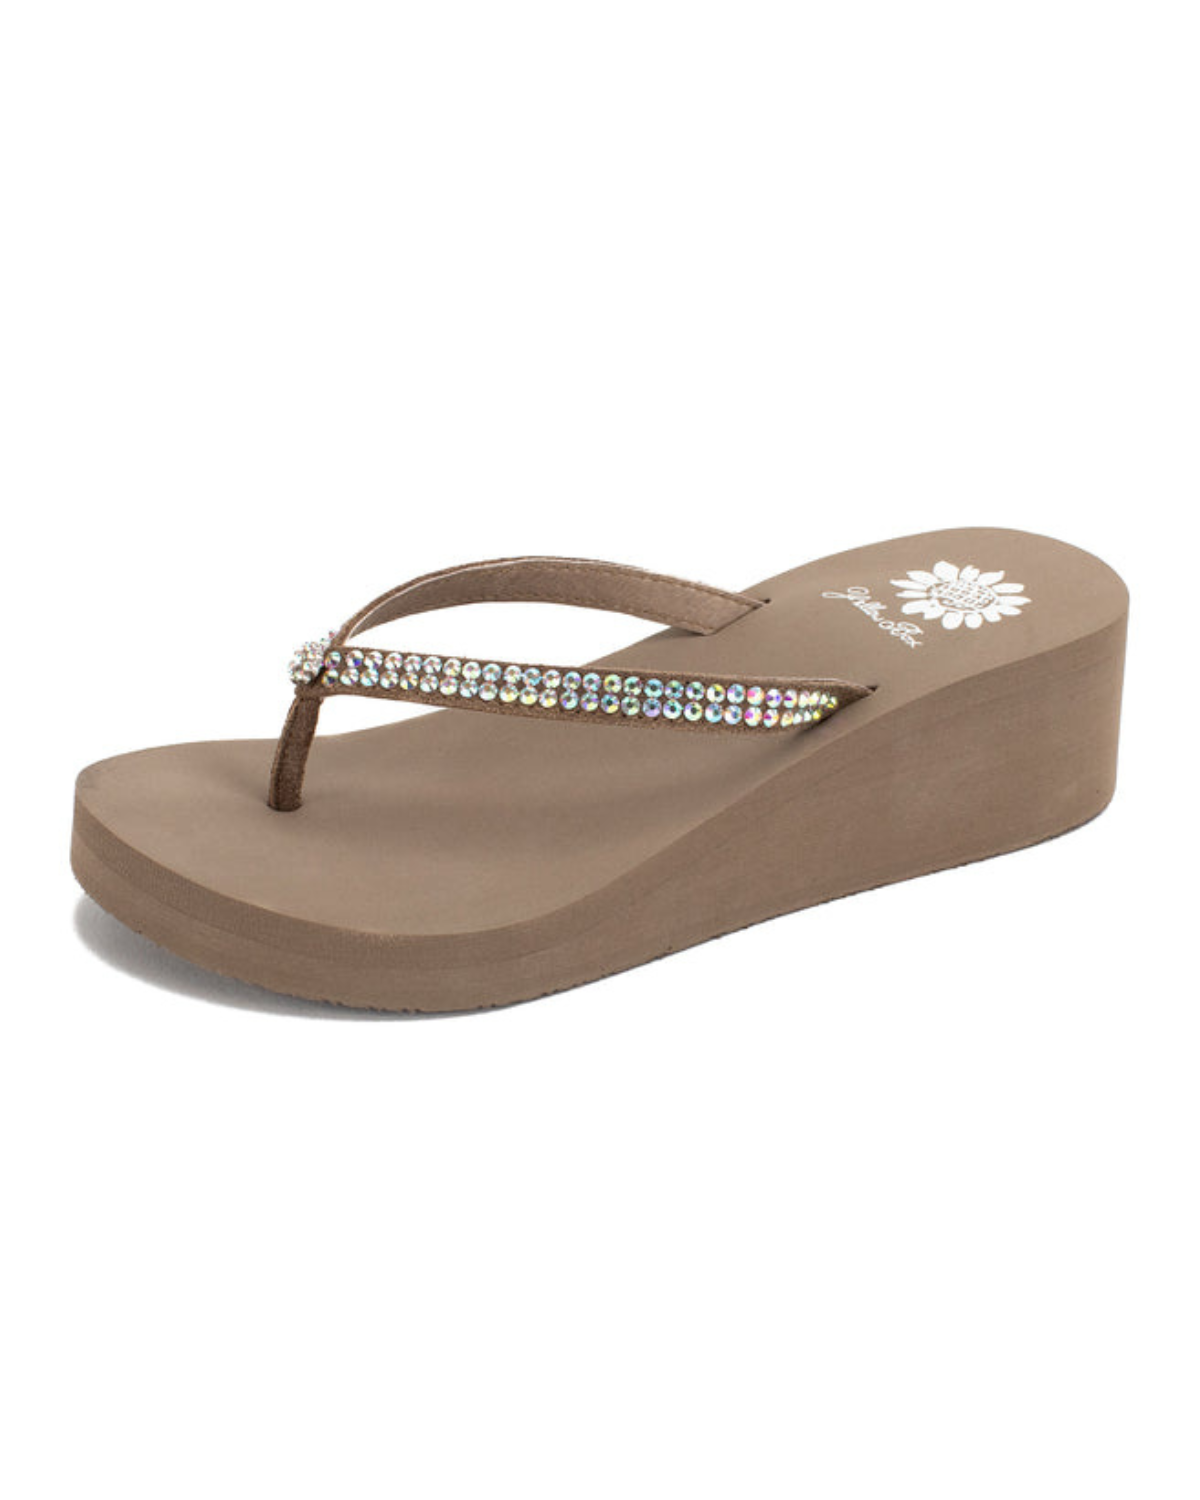 Front side view of a taupe wedge sandal with rhinestones on the strap on a white backdrop. The sandal has 1.75" heel height and 0.75" platform height.